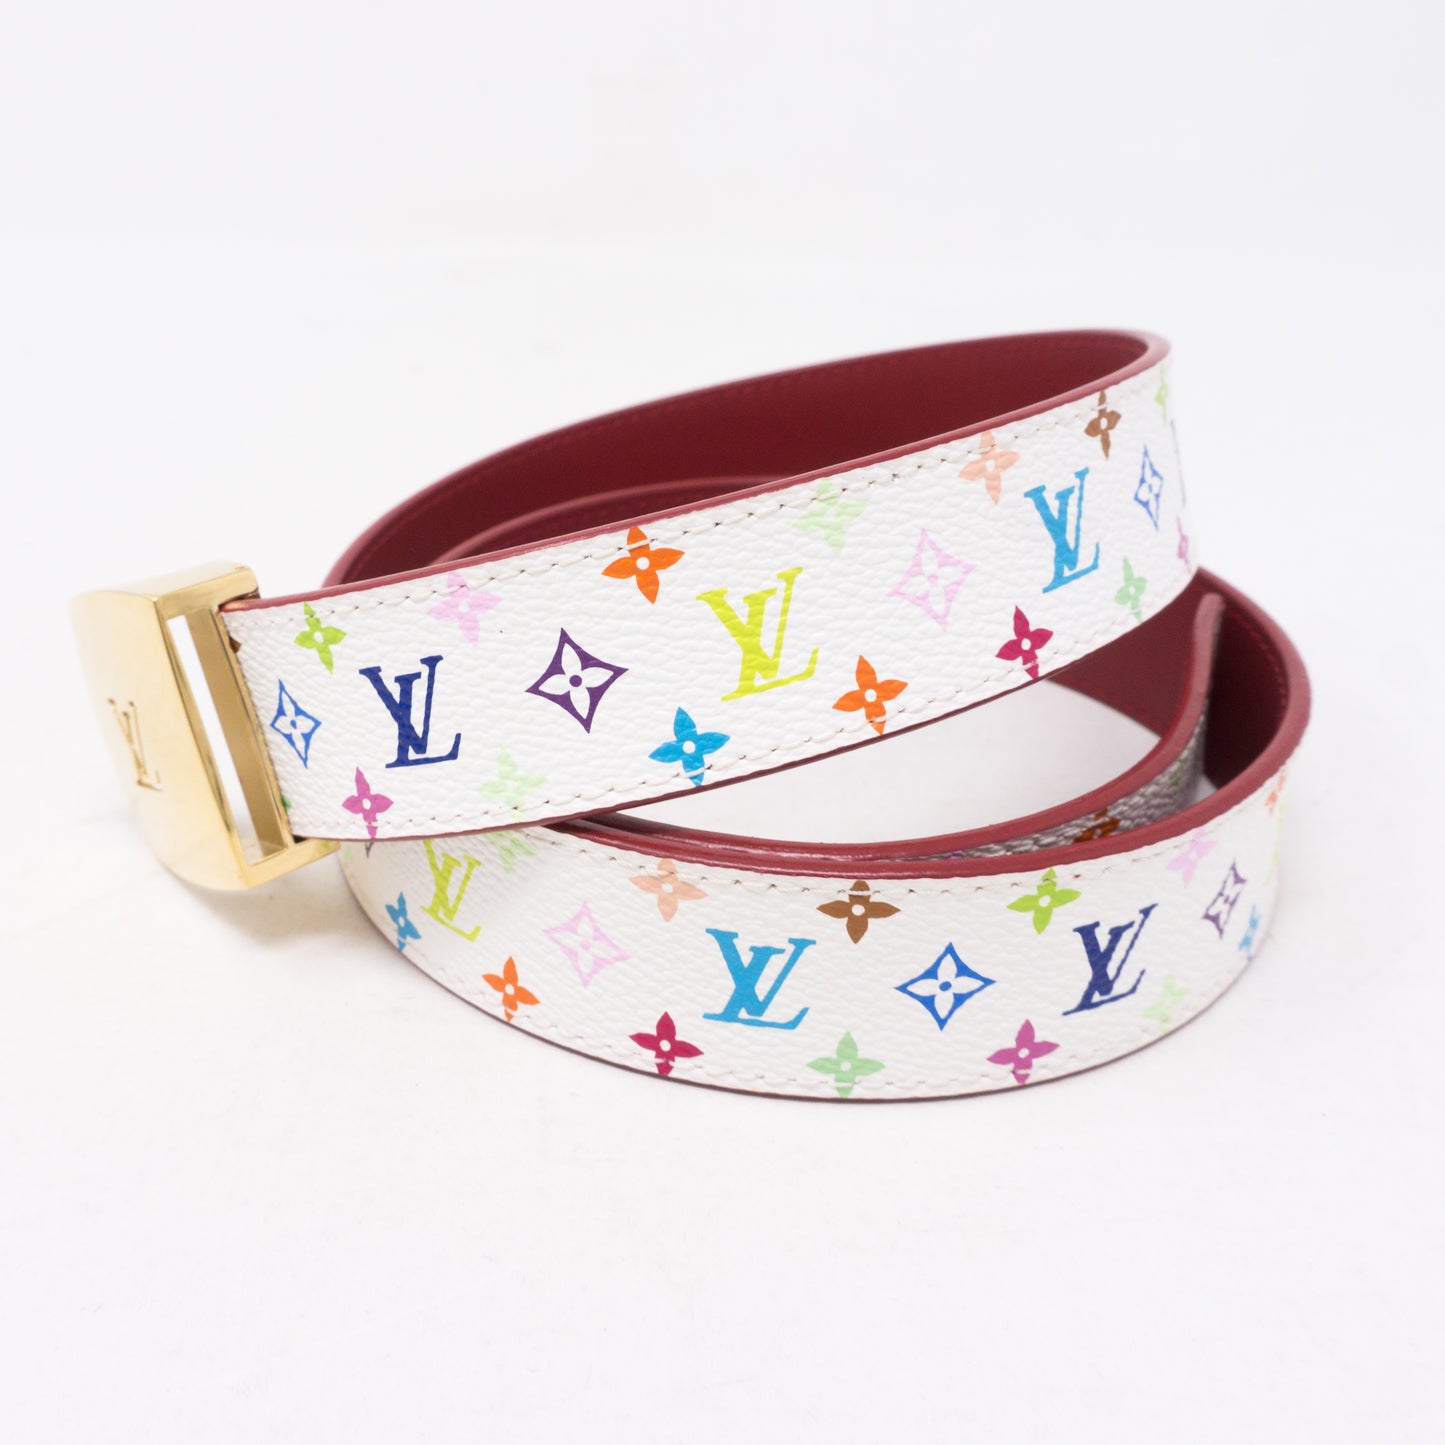 REVERSIBLE BELT LV LOUIS VUITTON M9039 85 CM IN BLUE AND WHITE LEATHER BELT